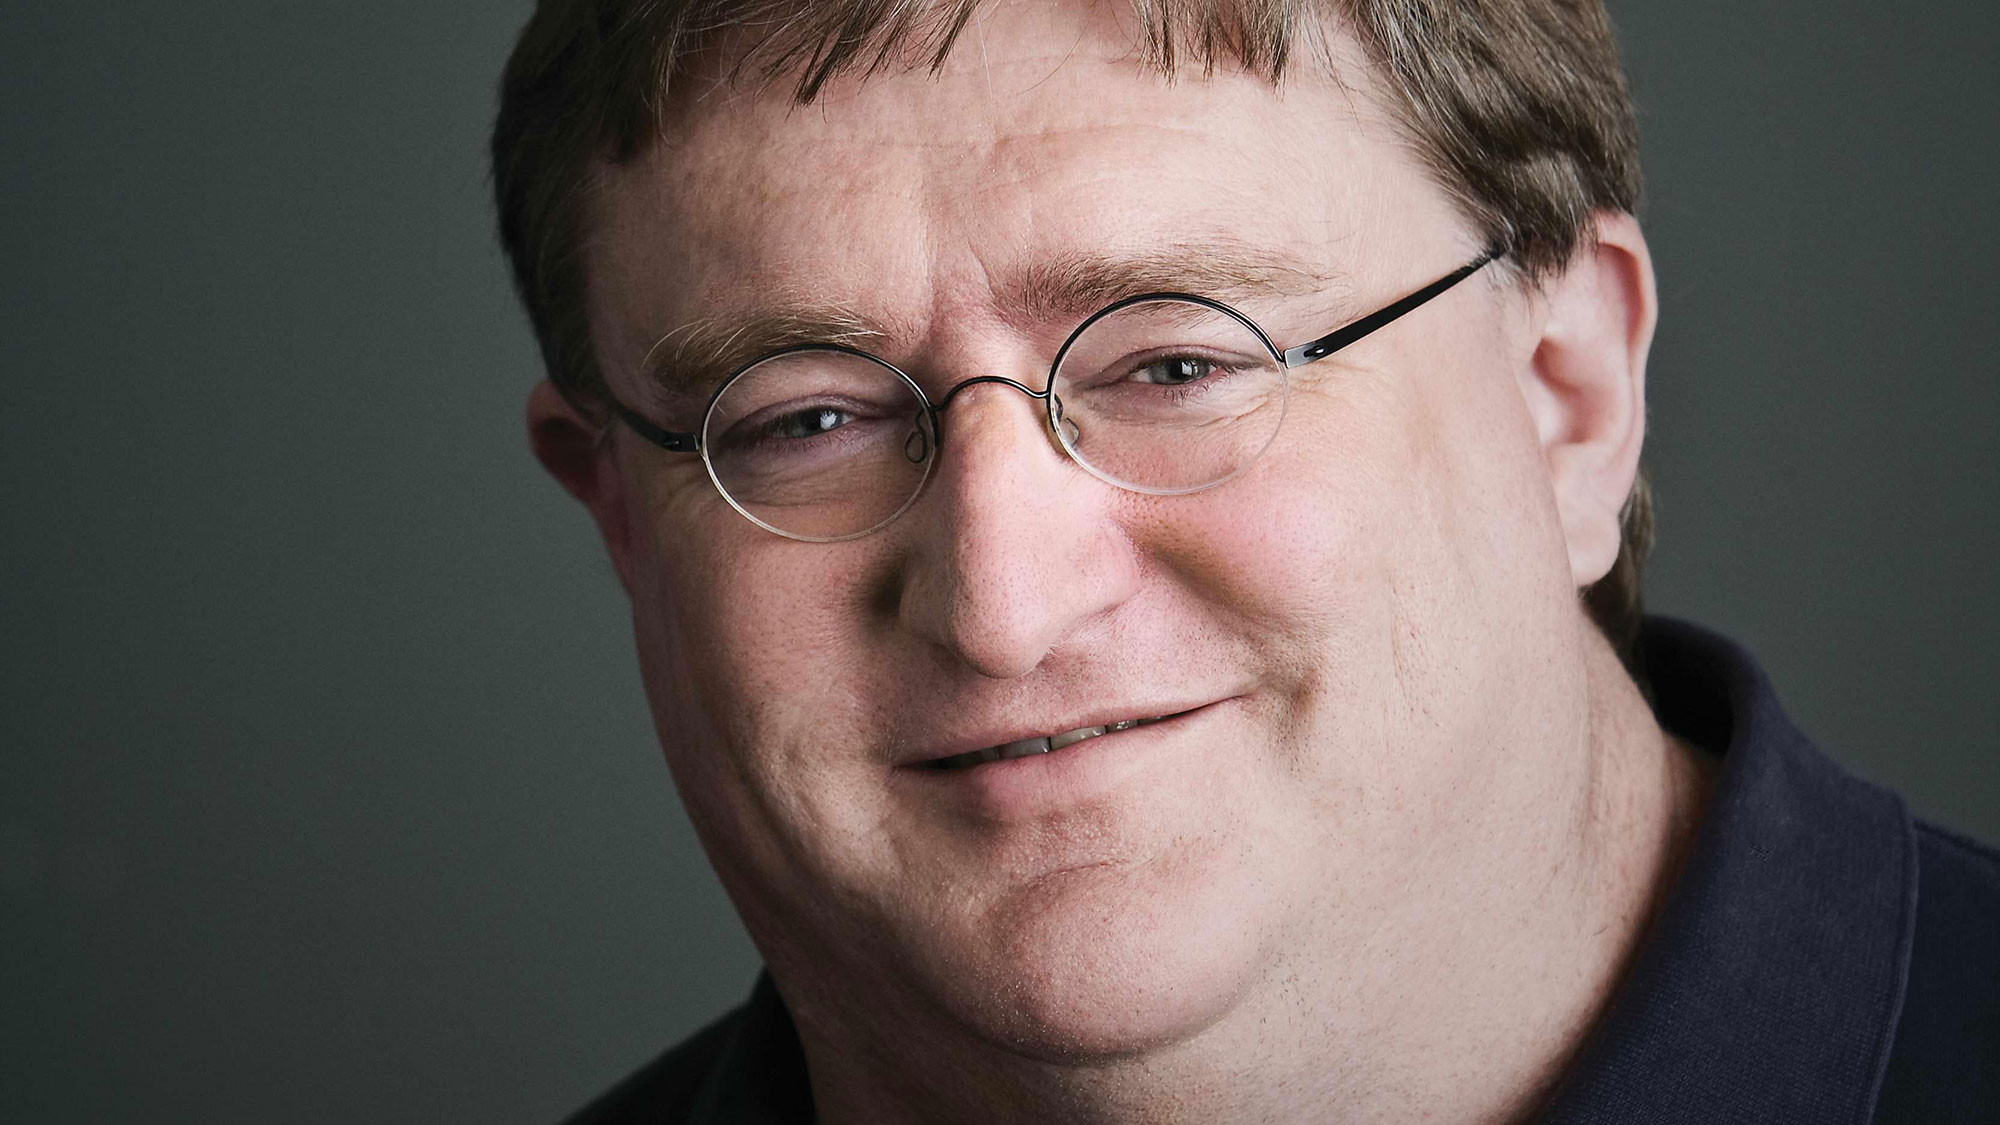 <p><span>Фото: &copy; <a href="https://commons.wikimedia.org/wiki/Category:Gabe_Newell" target="_blank">Wikipedia.org</a></span></p>